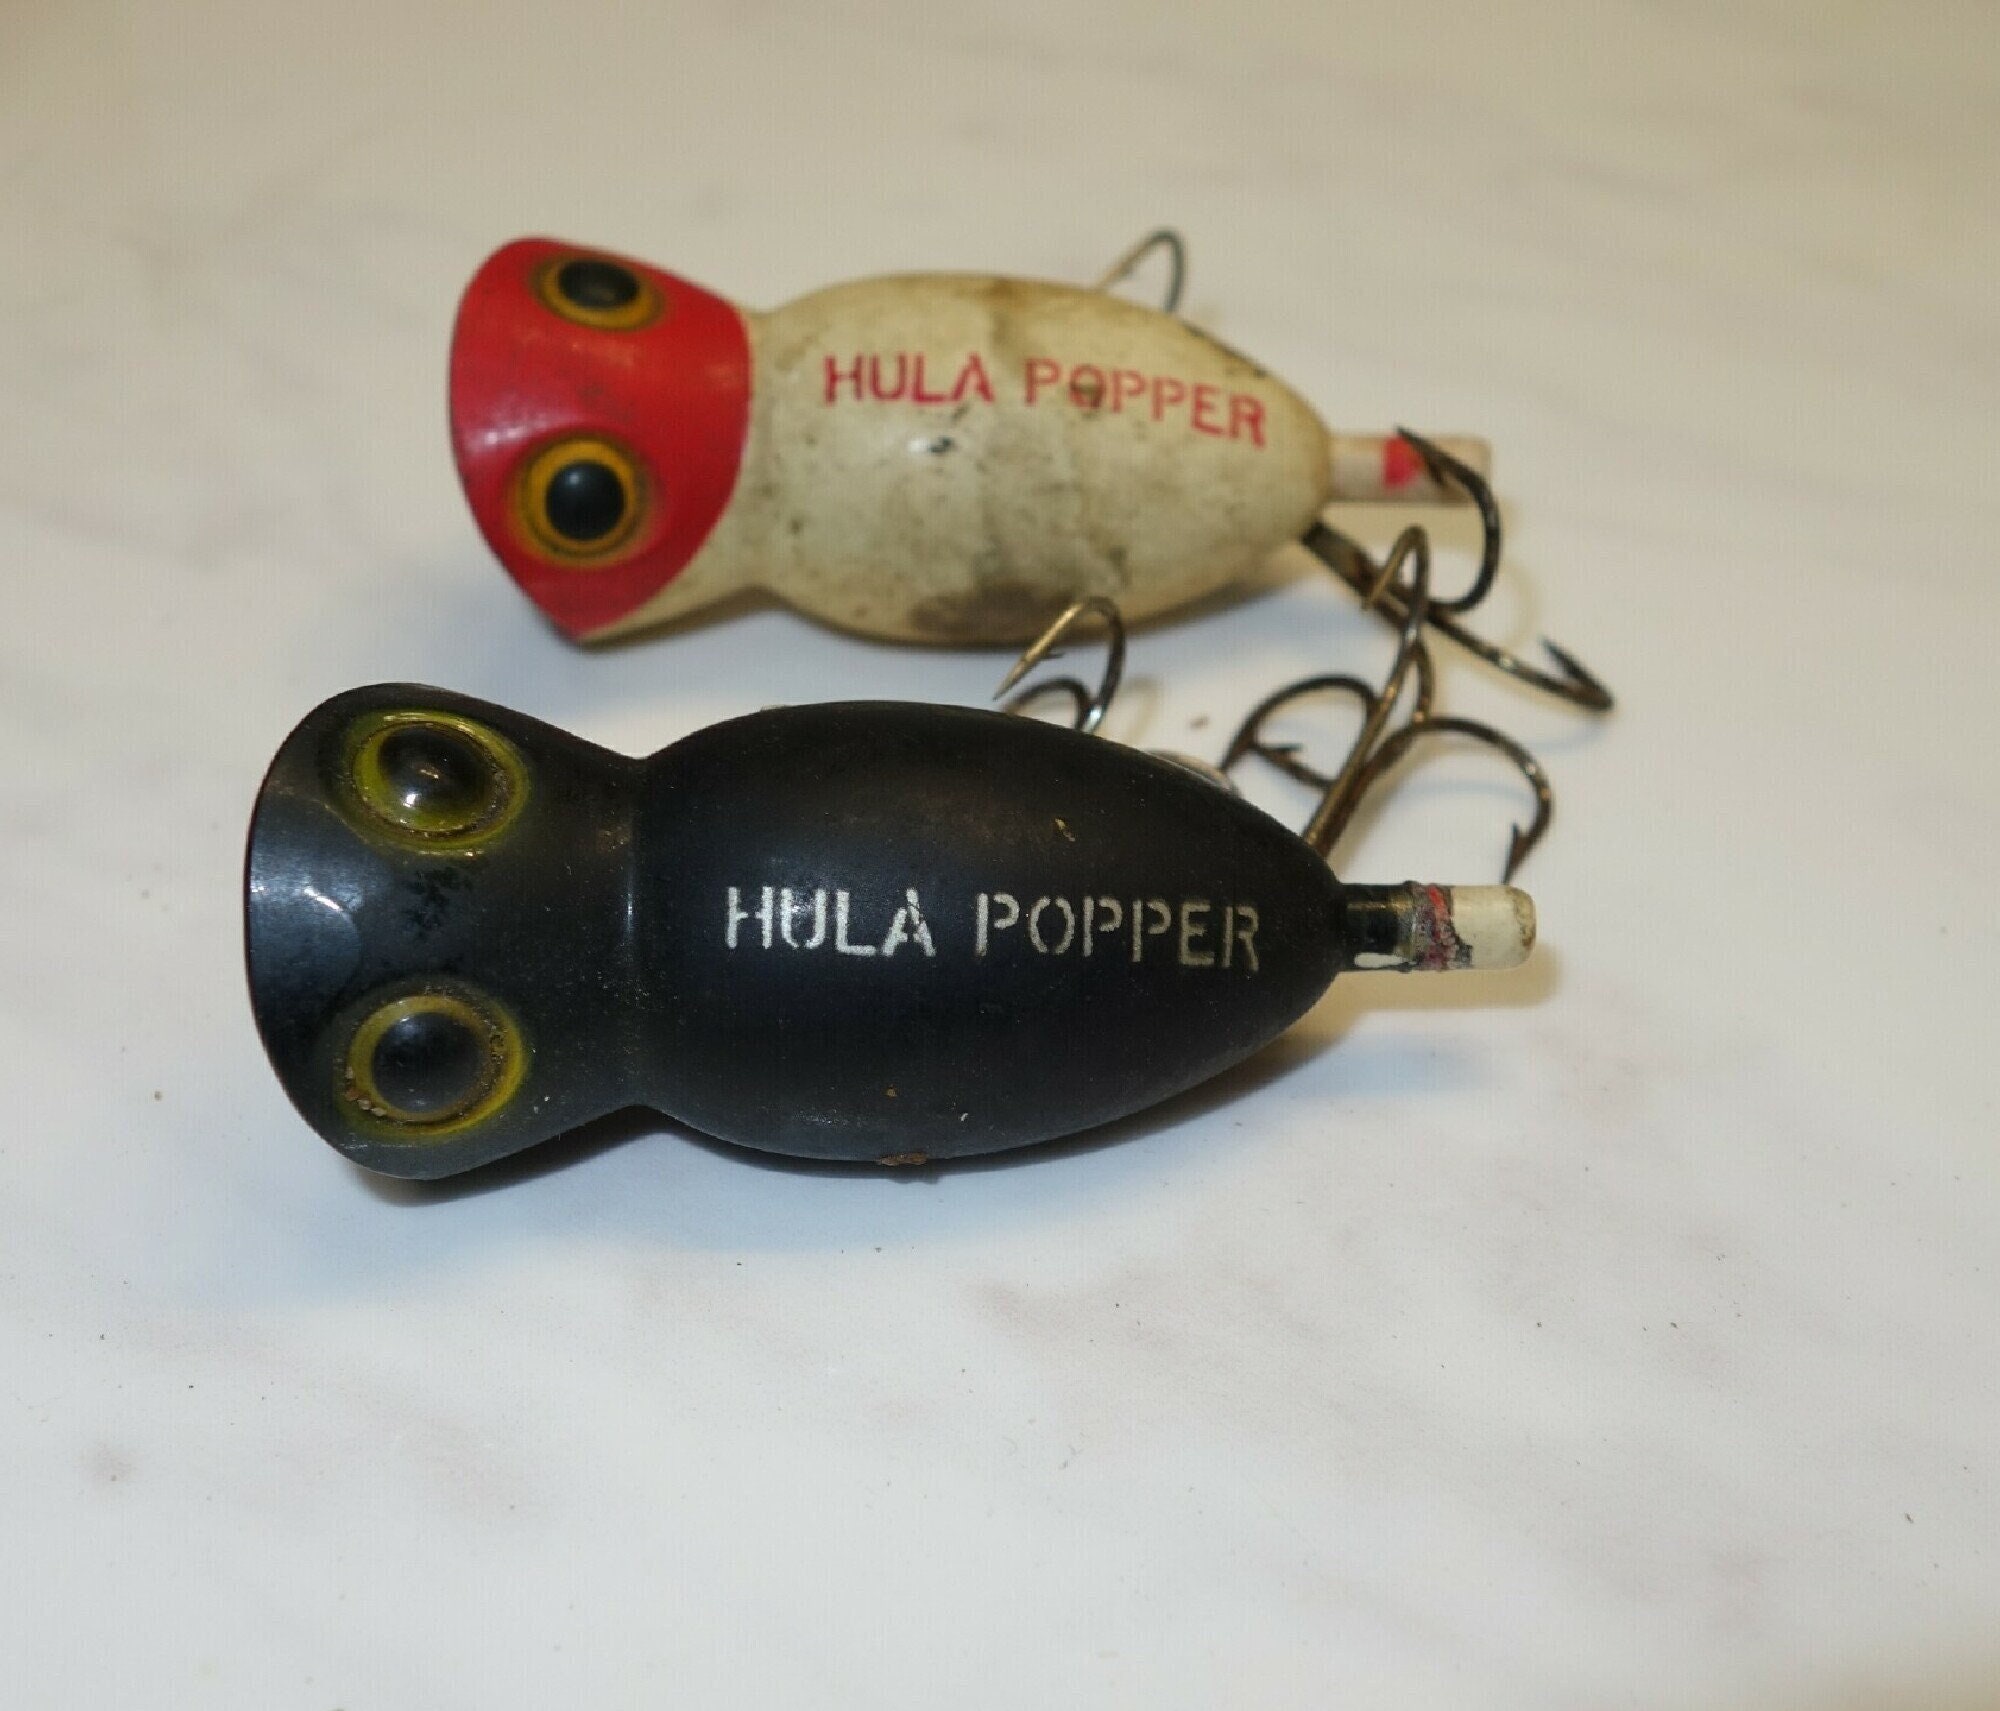 2 Vintage Fred Arbogast Hula Popper Fishing Lures - FREE SHIPPING!!